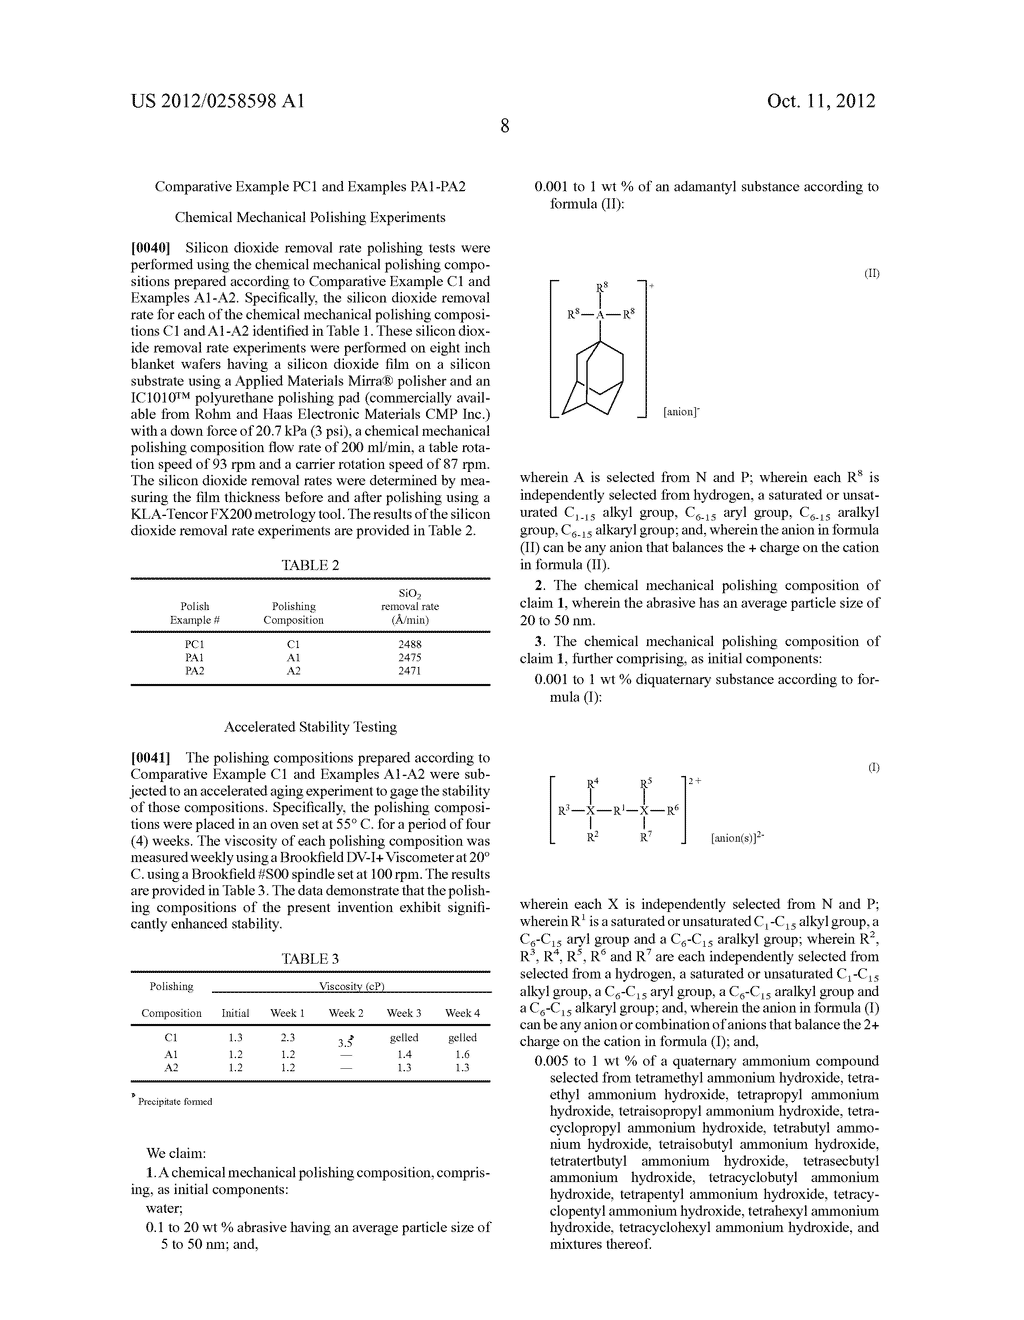 Stabilized Chemical Mechanical Polishing Composition and Method of     Polishing a Substrate - diagram, schematic, and image 09